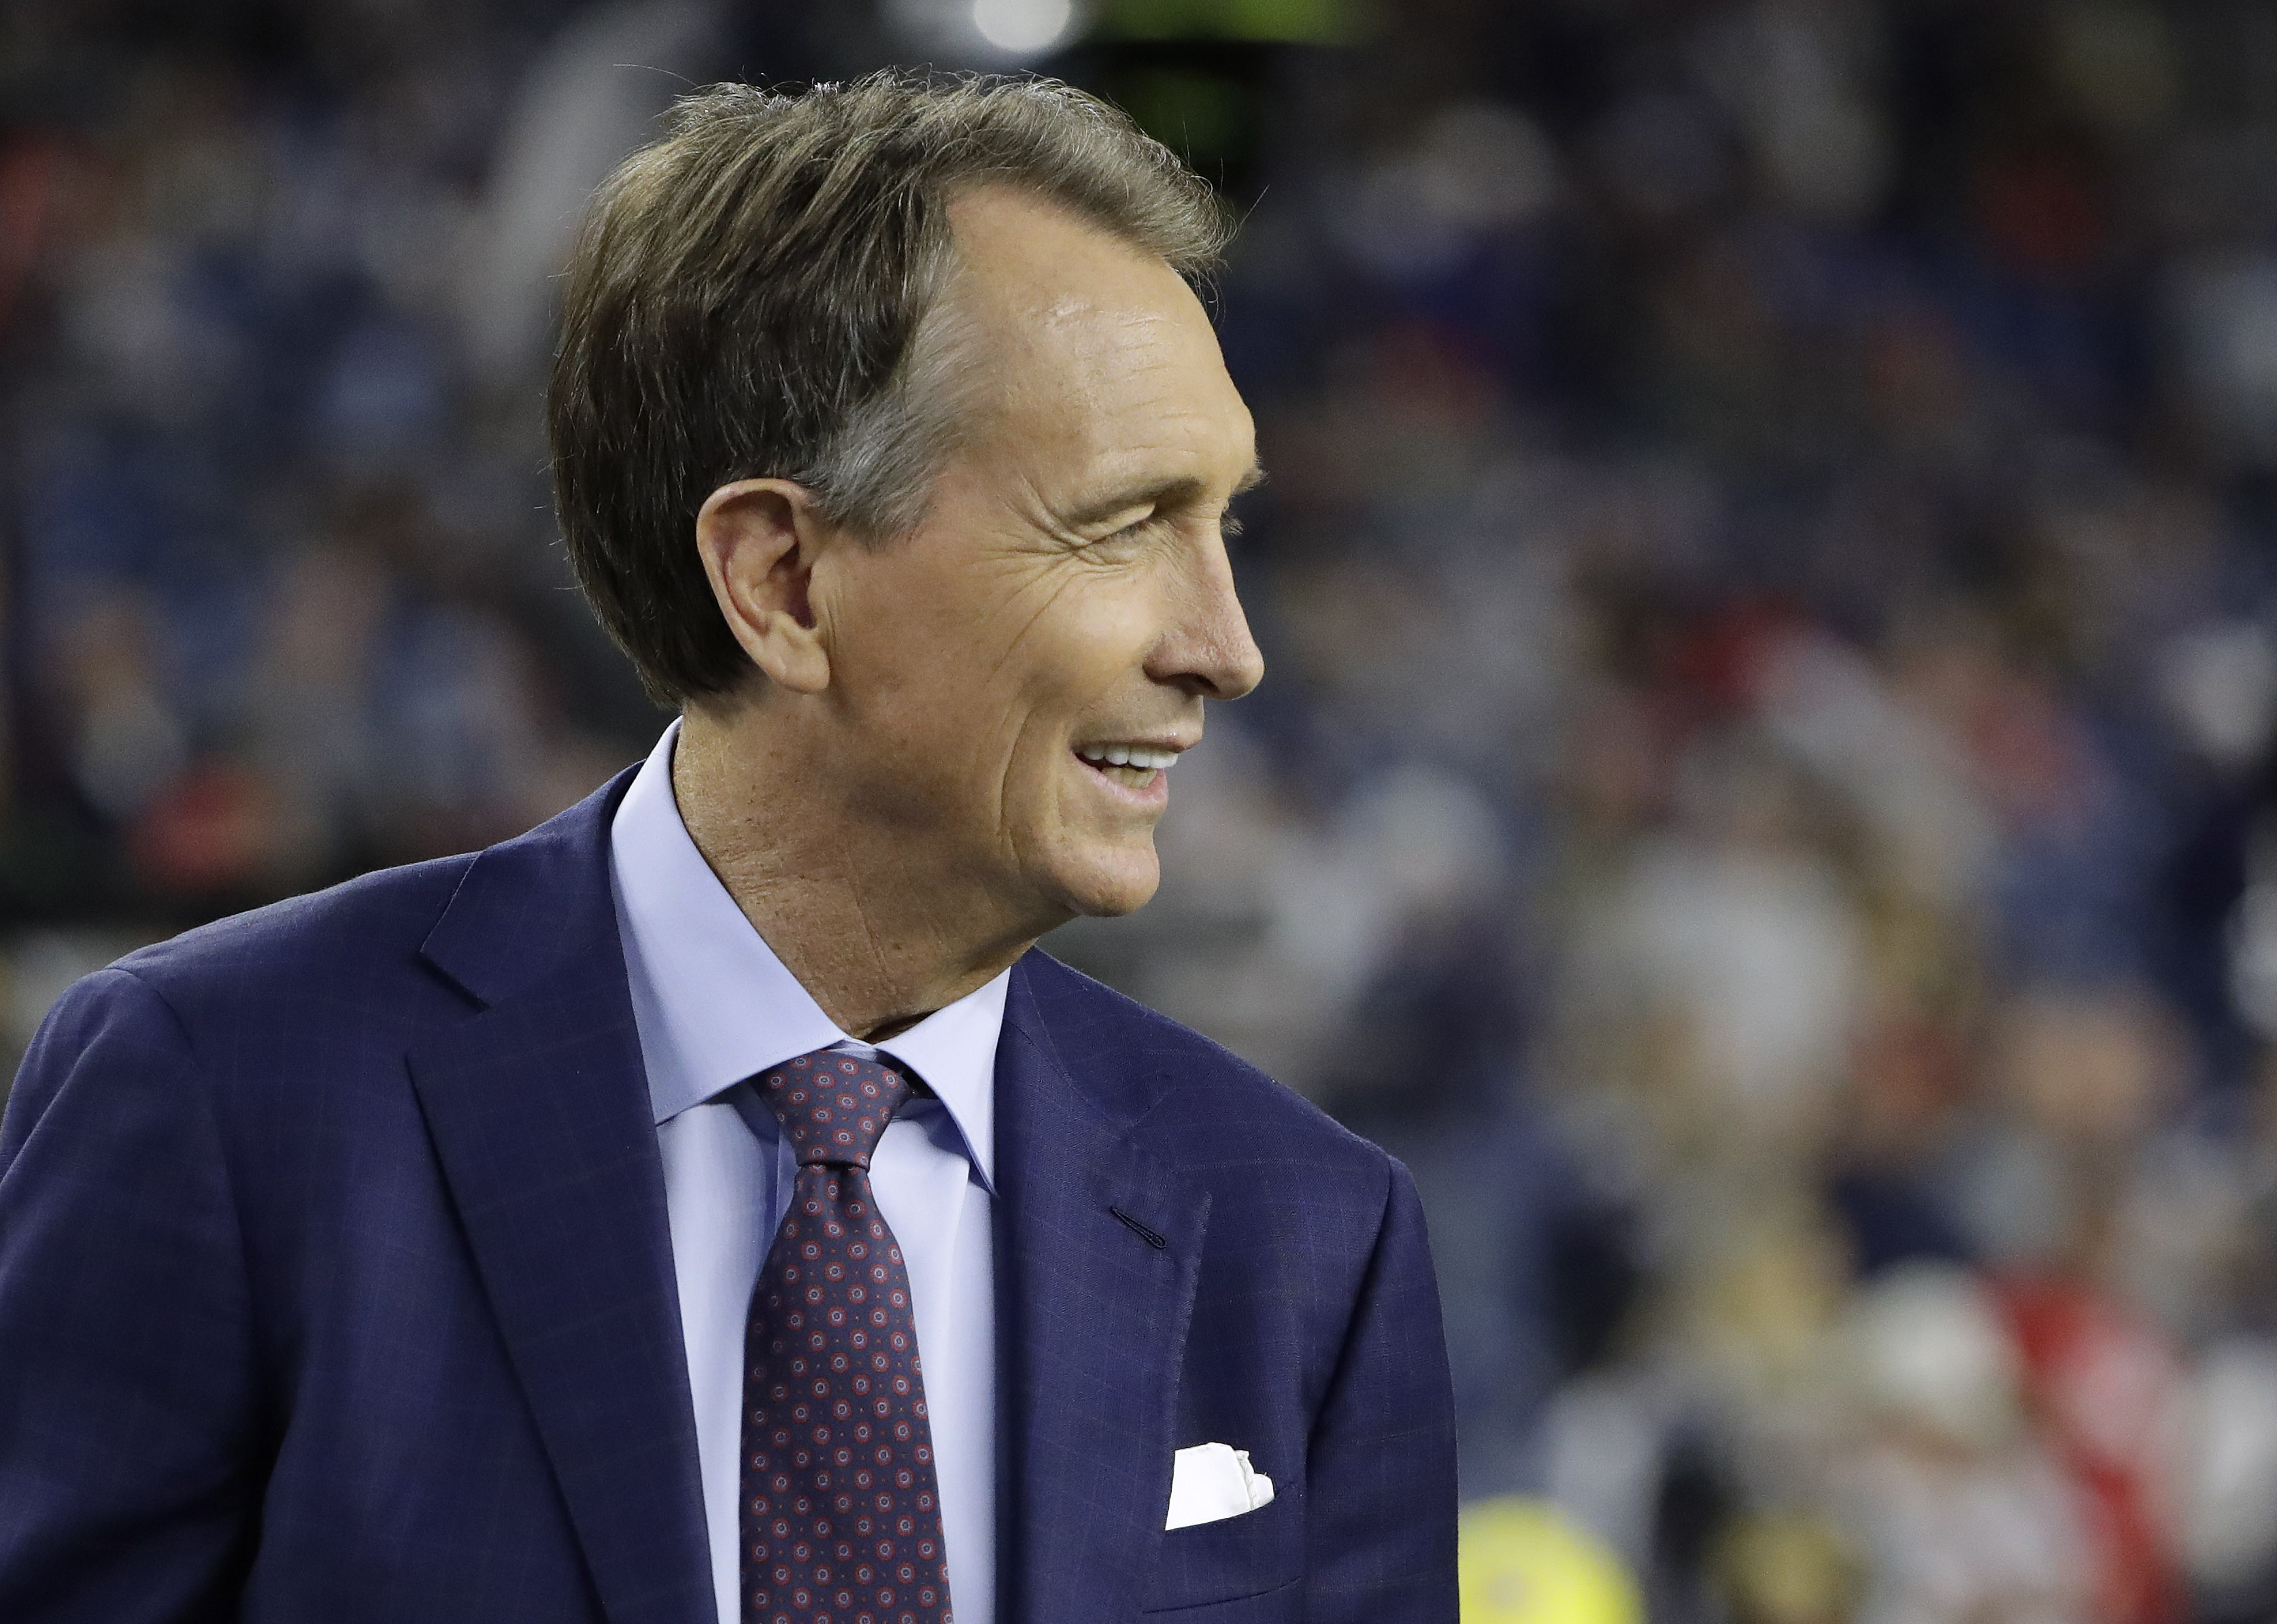 Cris Collinsworth laughed when he heard what Aaron Rodgers said